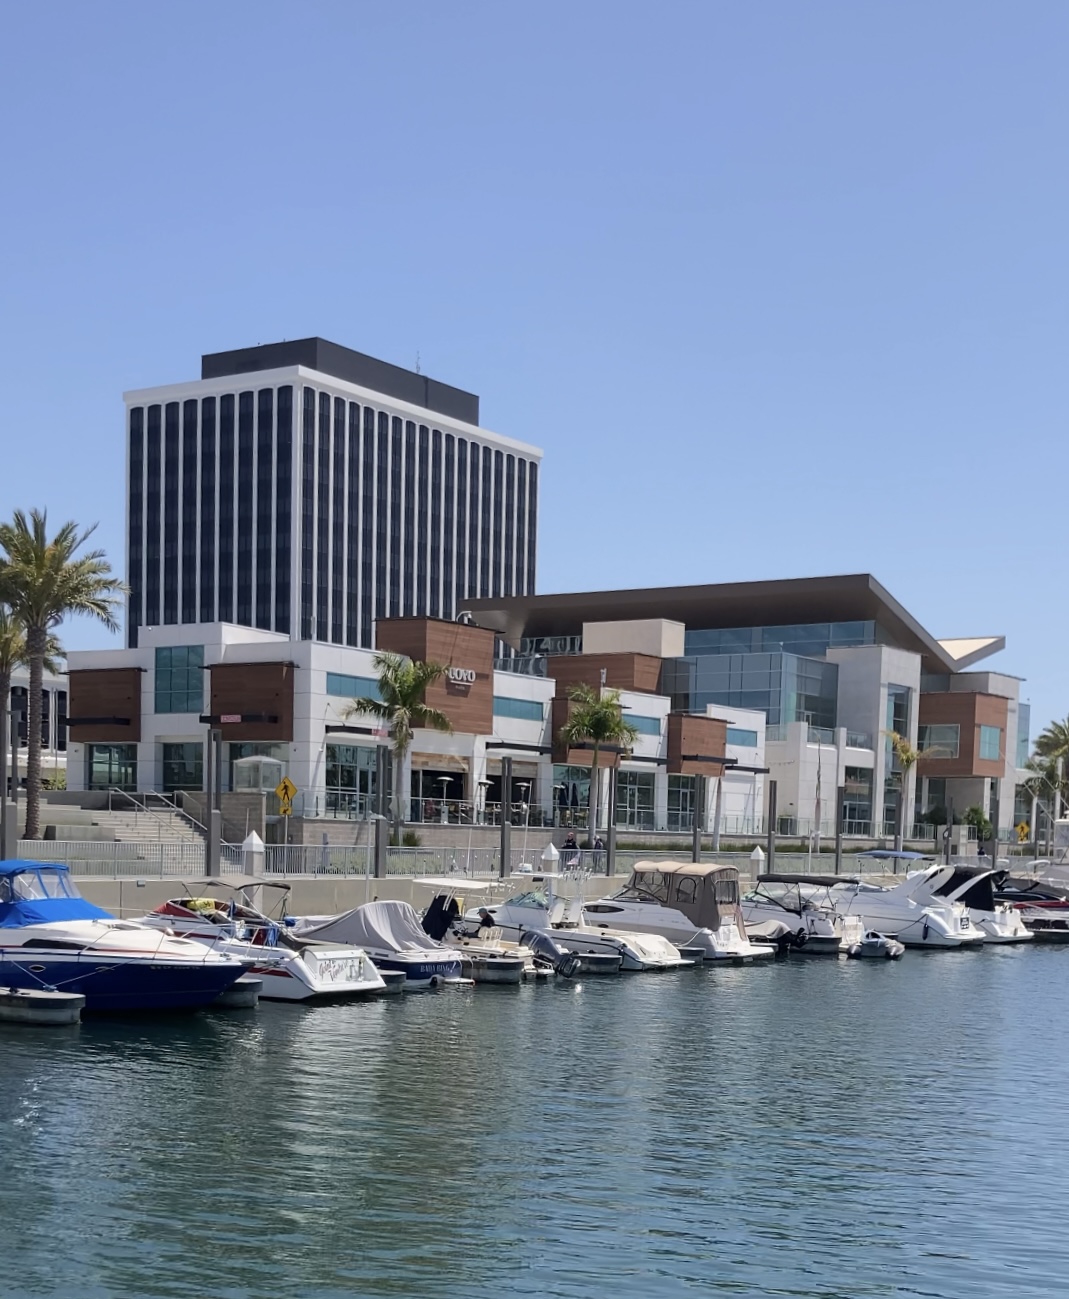 Shopping building with harbor and boats in marina